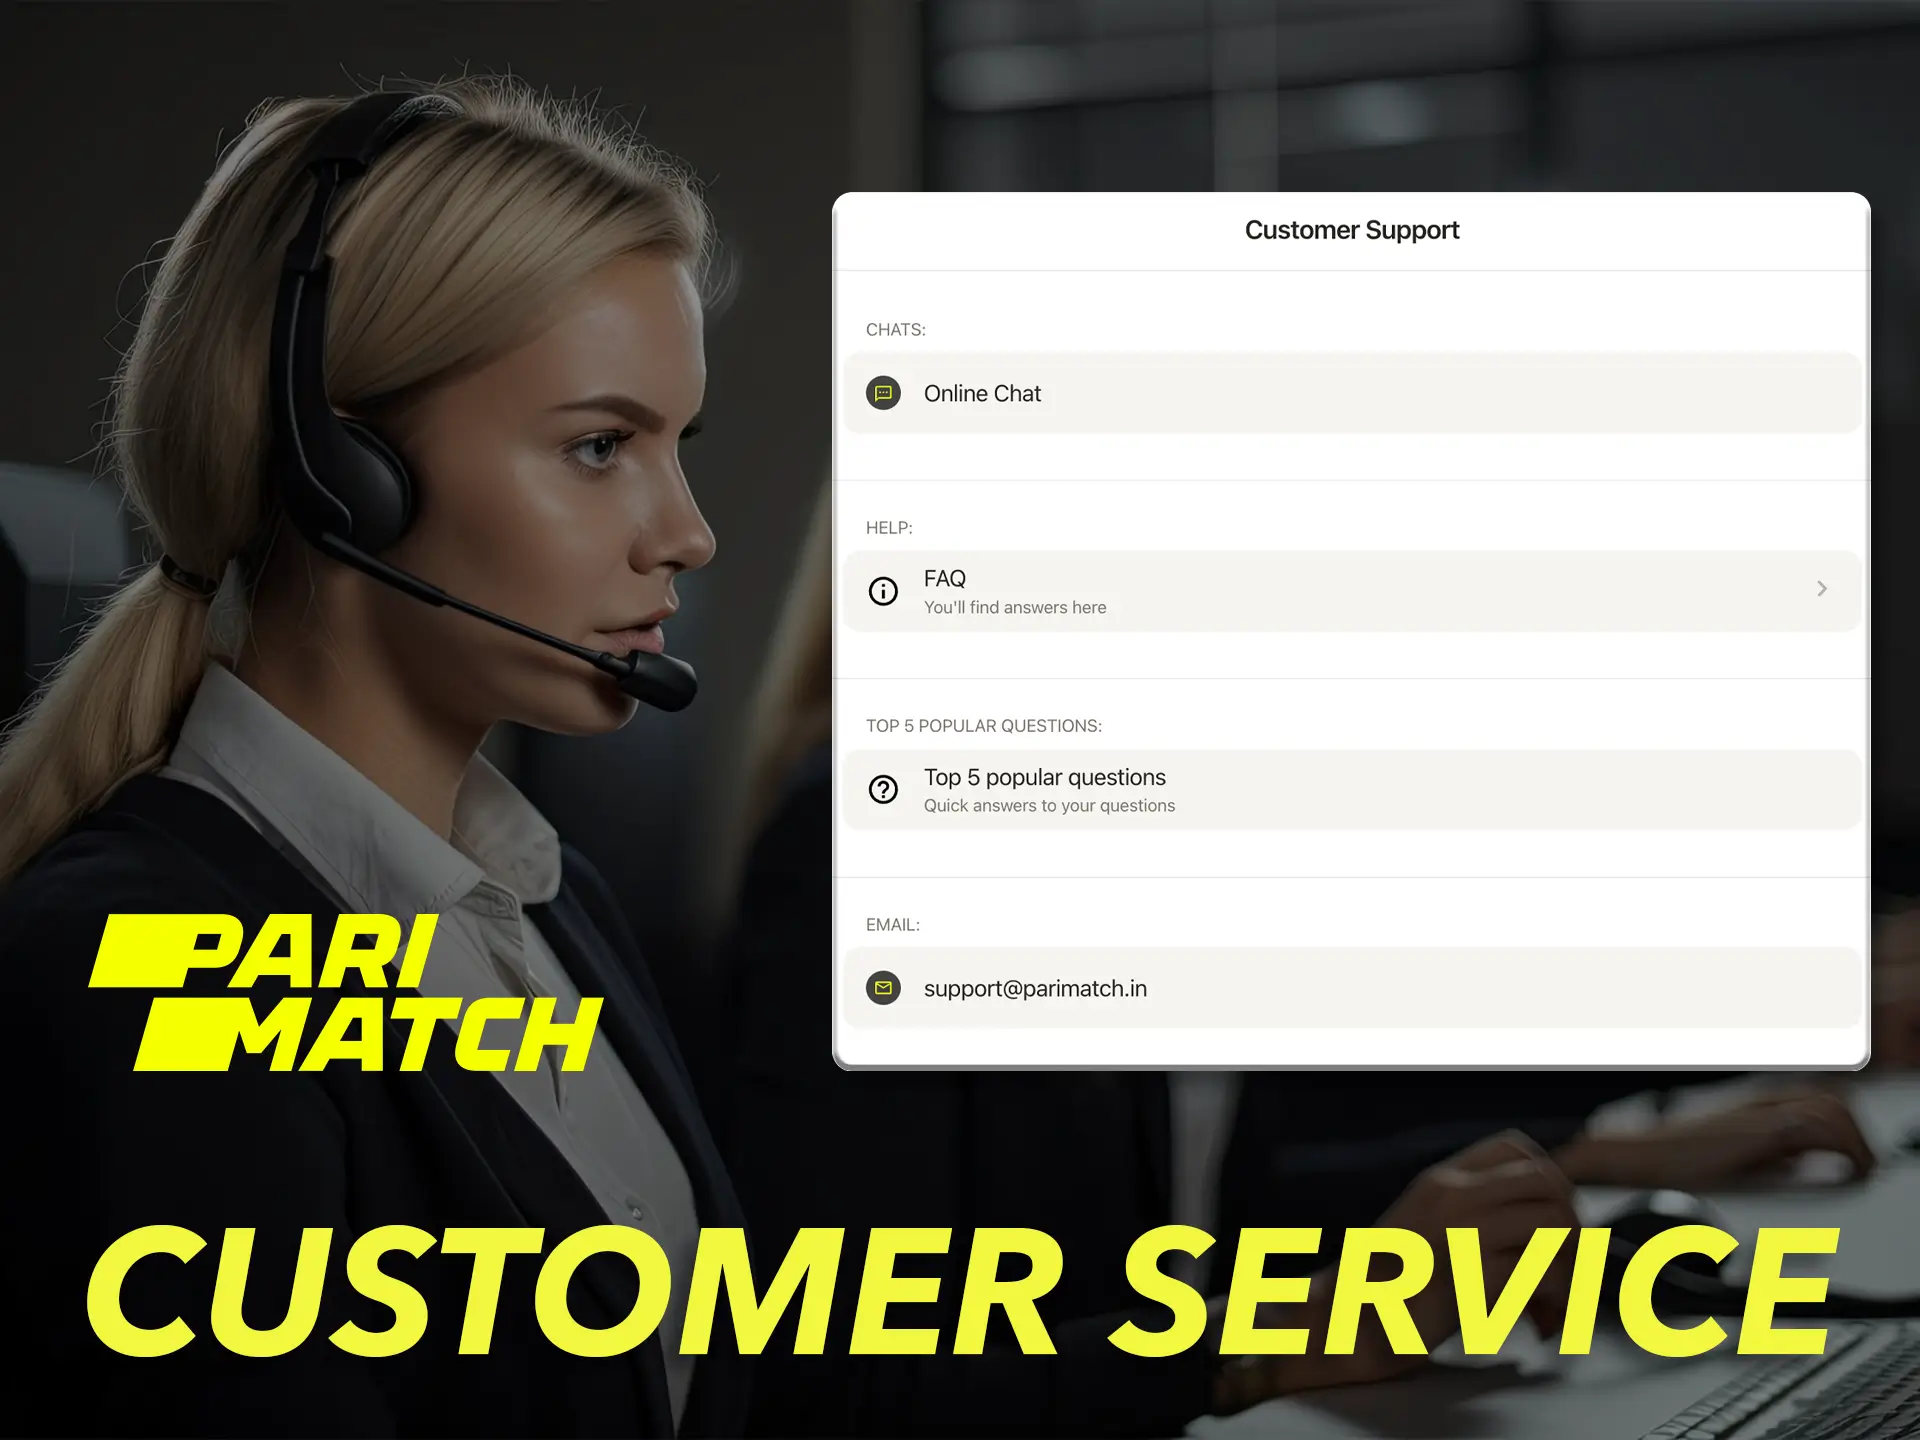 Parimatch casino service provides a high level of support to its customers.